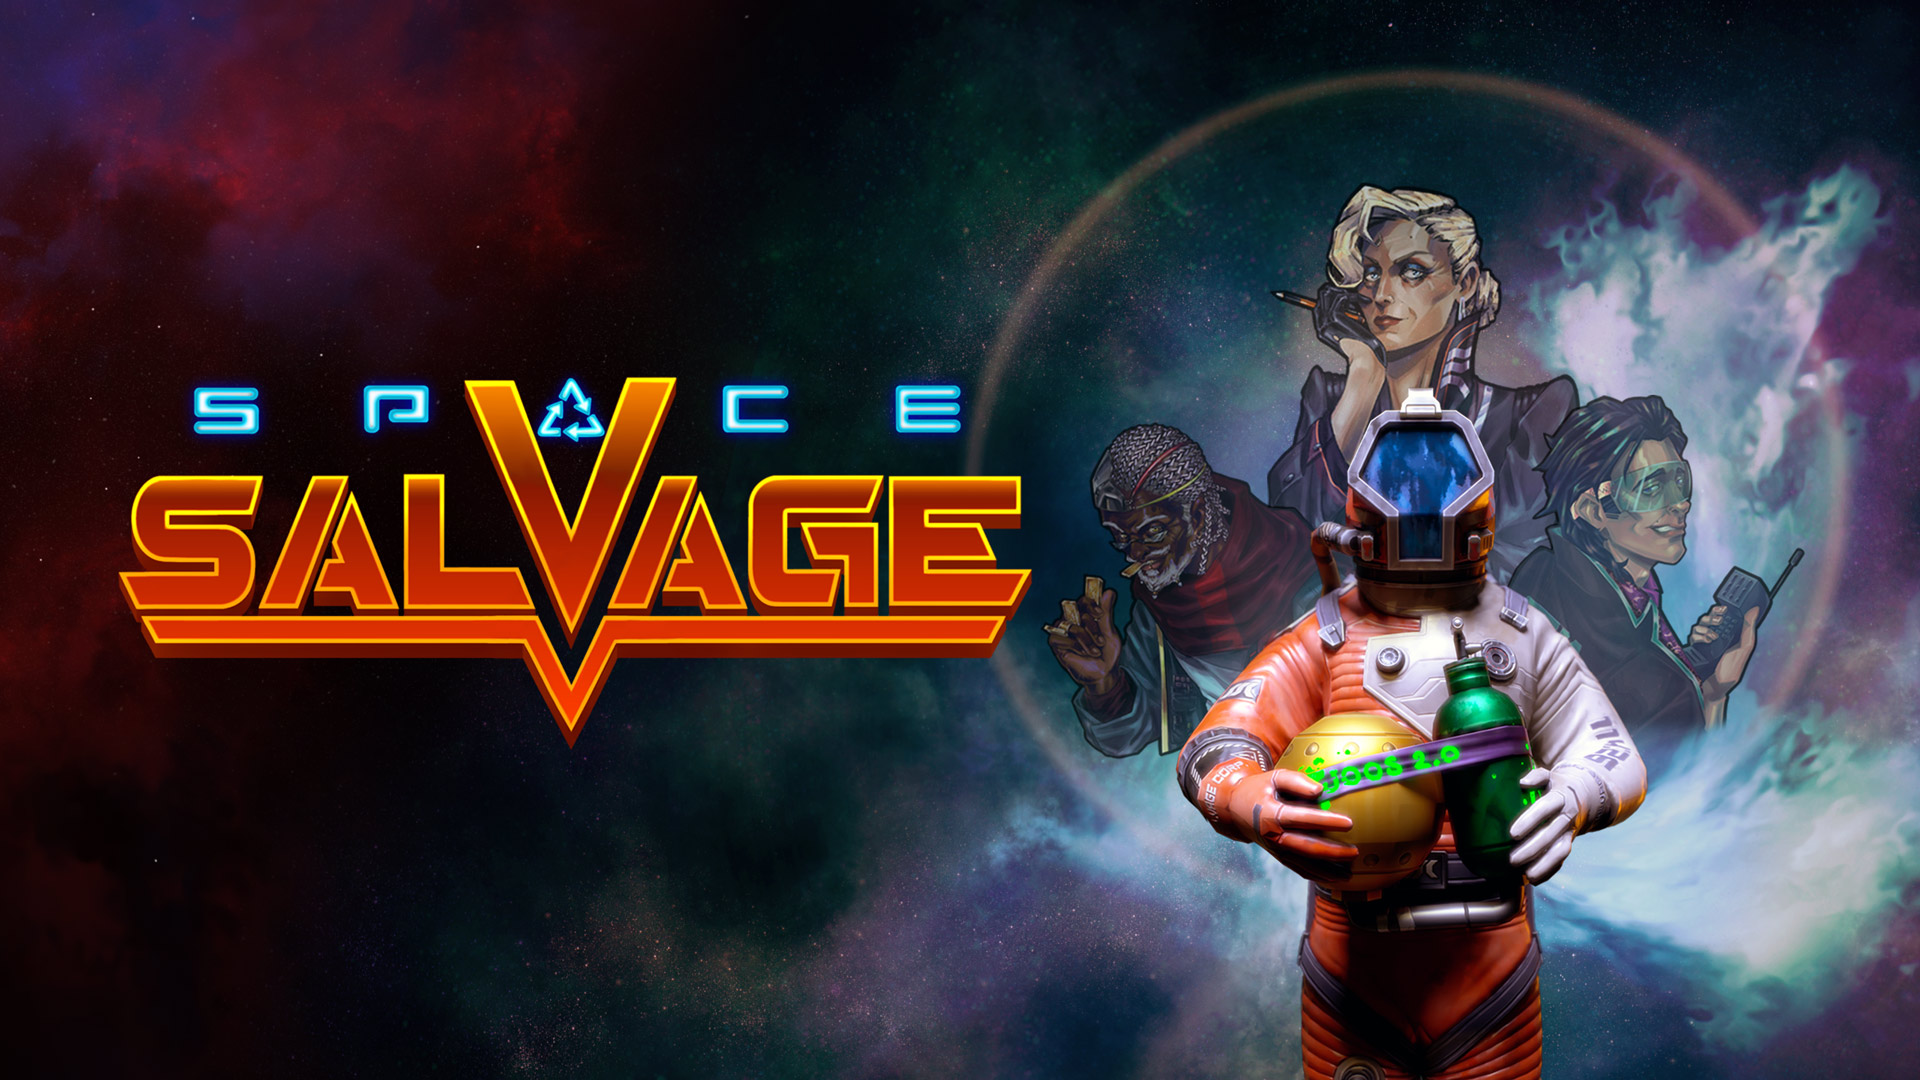 ‘Space Salvage’ is a Retro Sci-fi Space Sim Coming to Quest & PC VR This Year – Road to VR